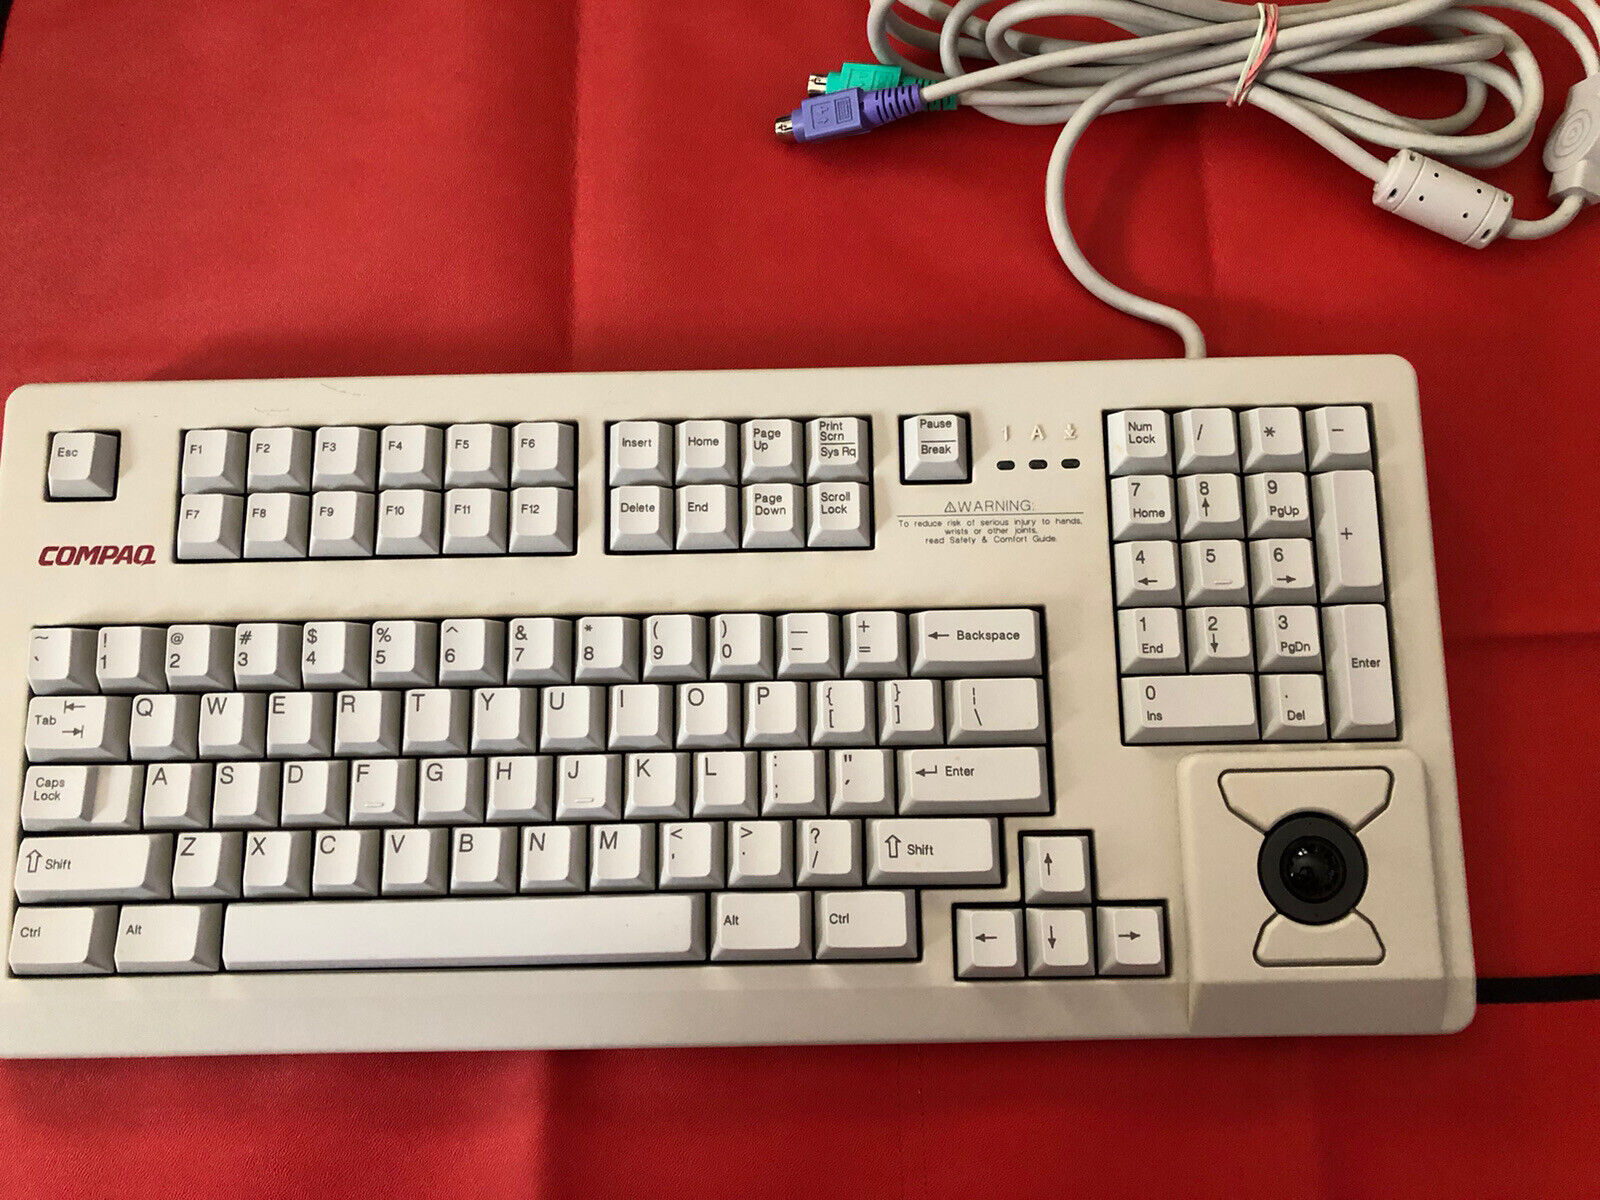 Compaq MX 11800 Mechanical Clicky PS2 Keyboard w/ Integrated Trackball Mouse